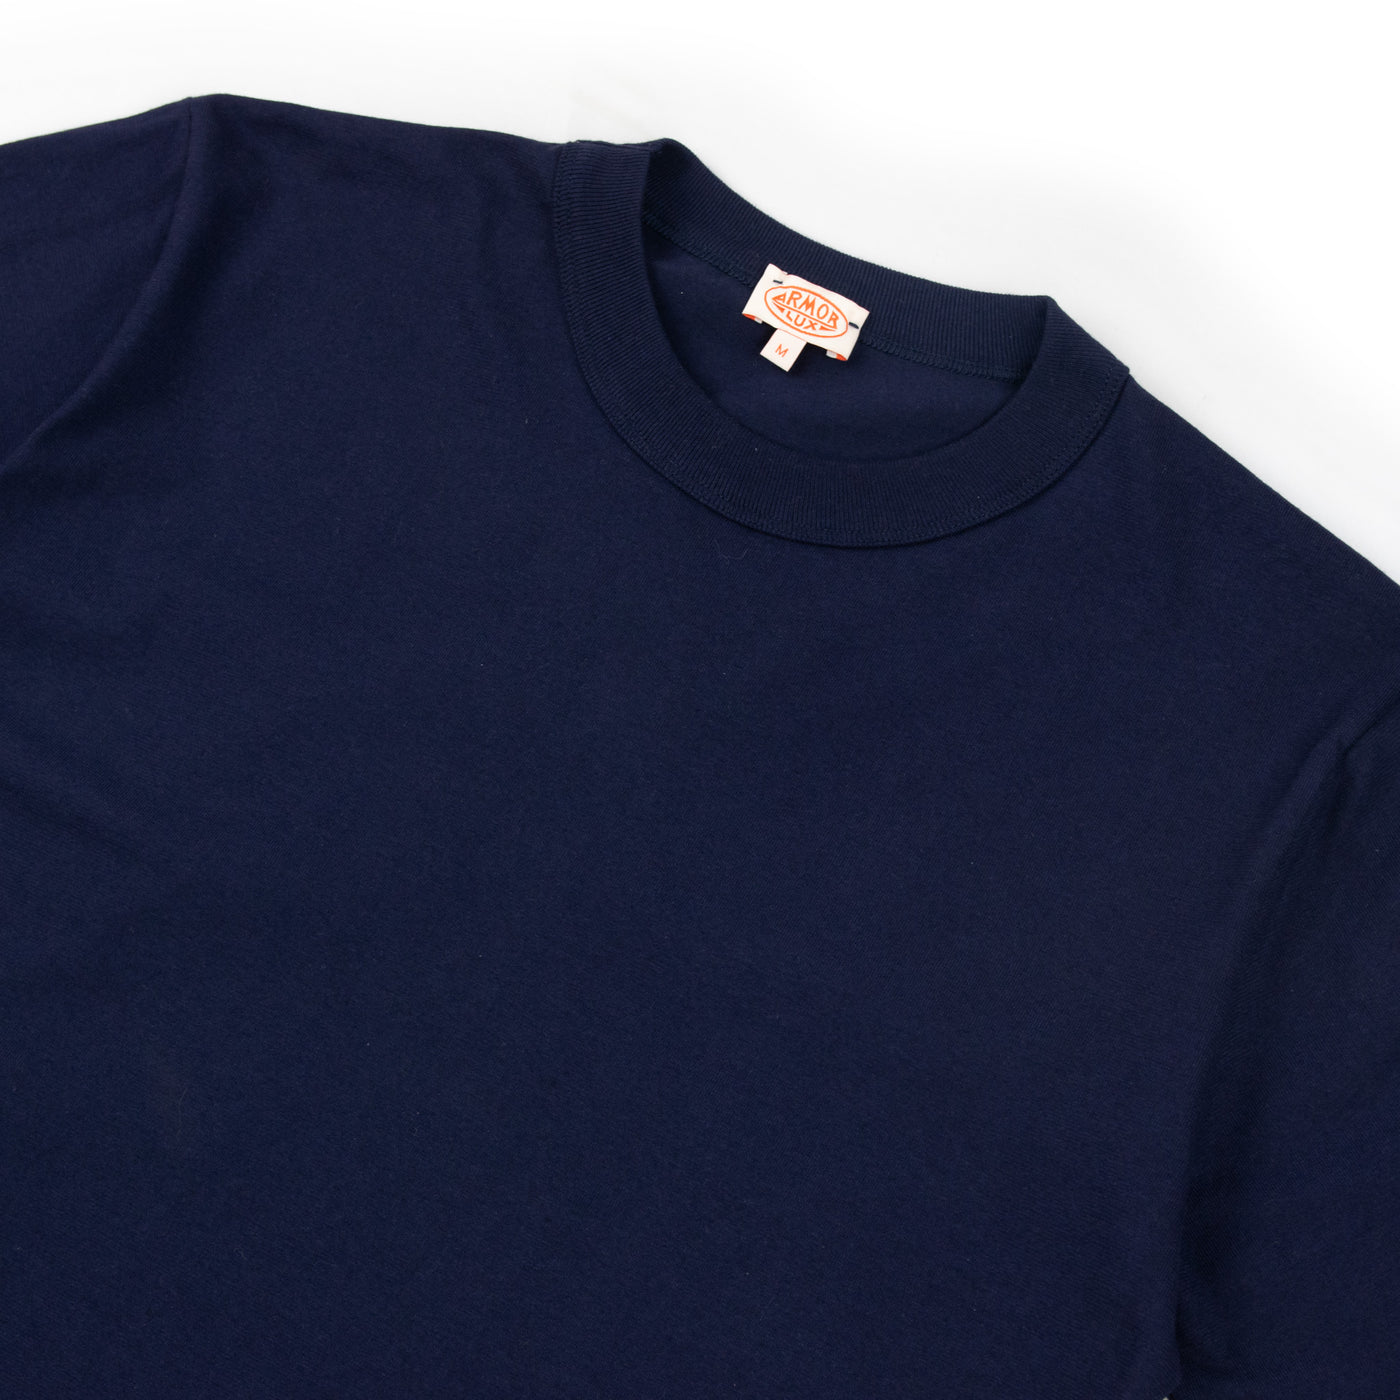 Armor-Lux Heritage 70990 Callac T-Shirt Navire Navy Blue Chest